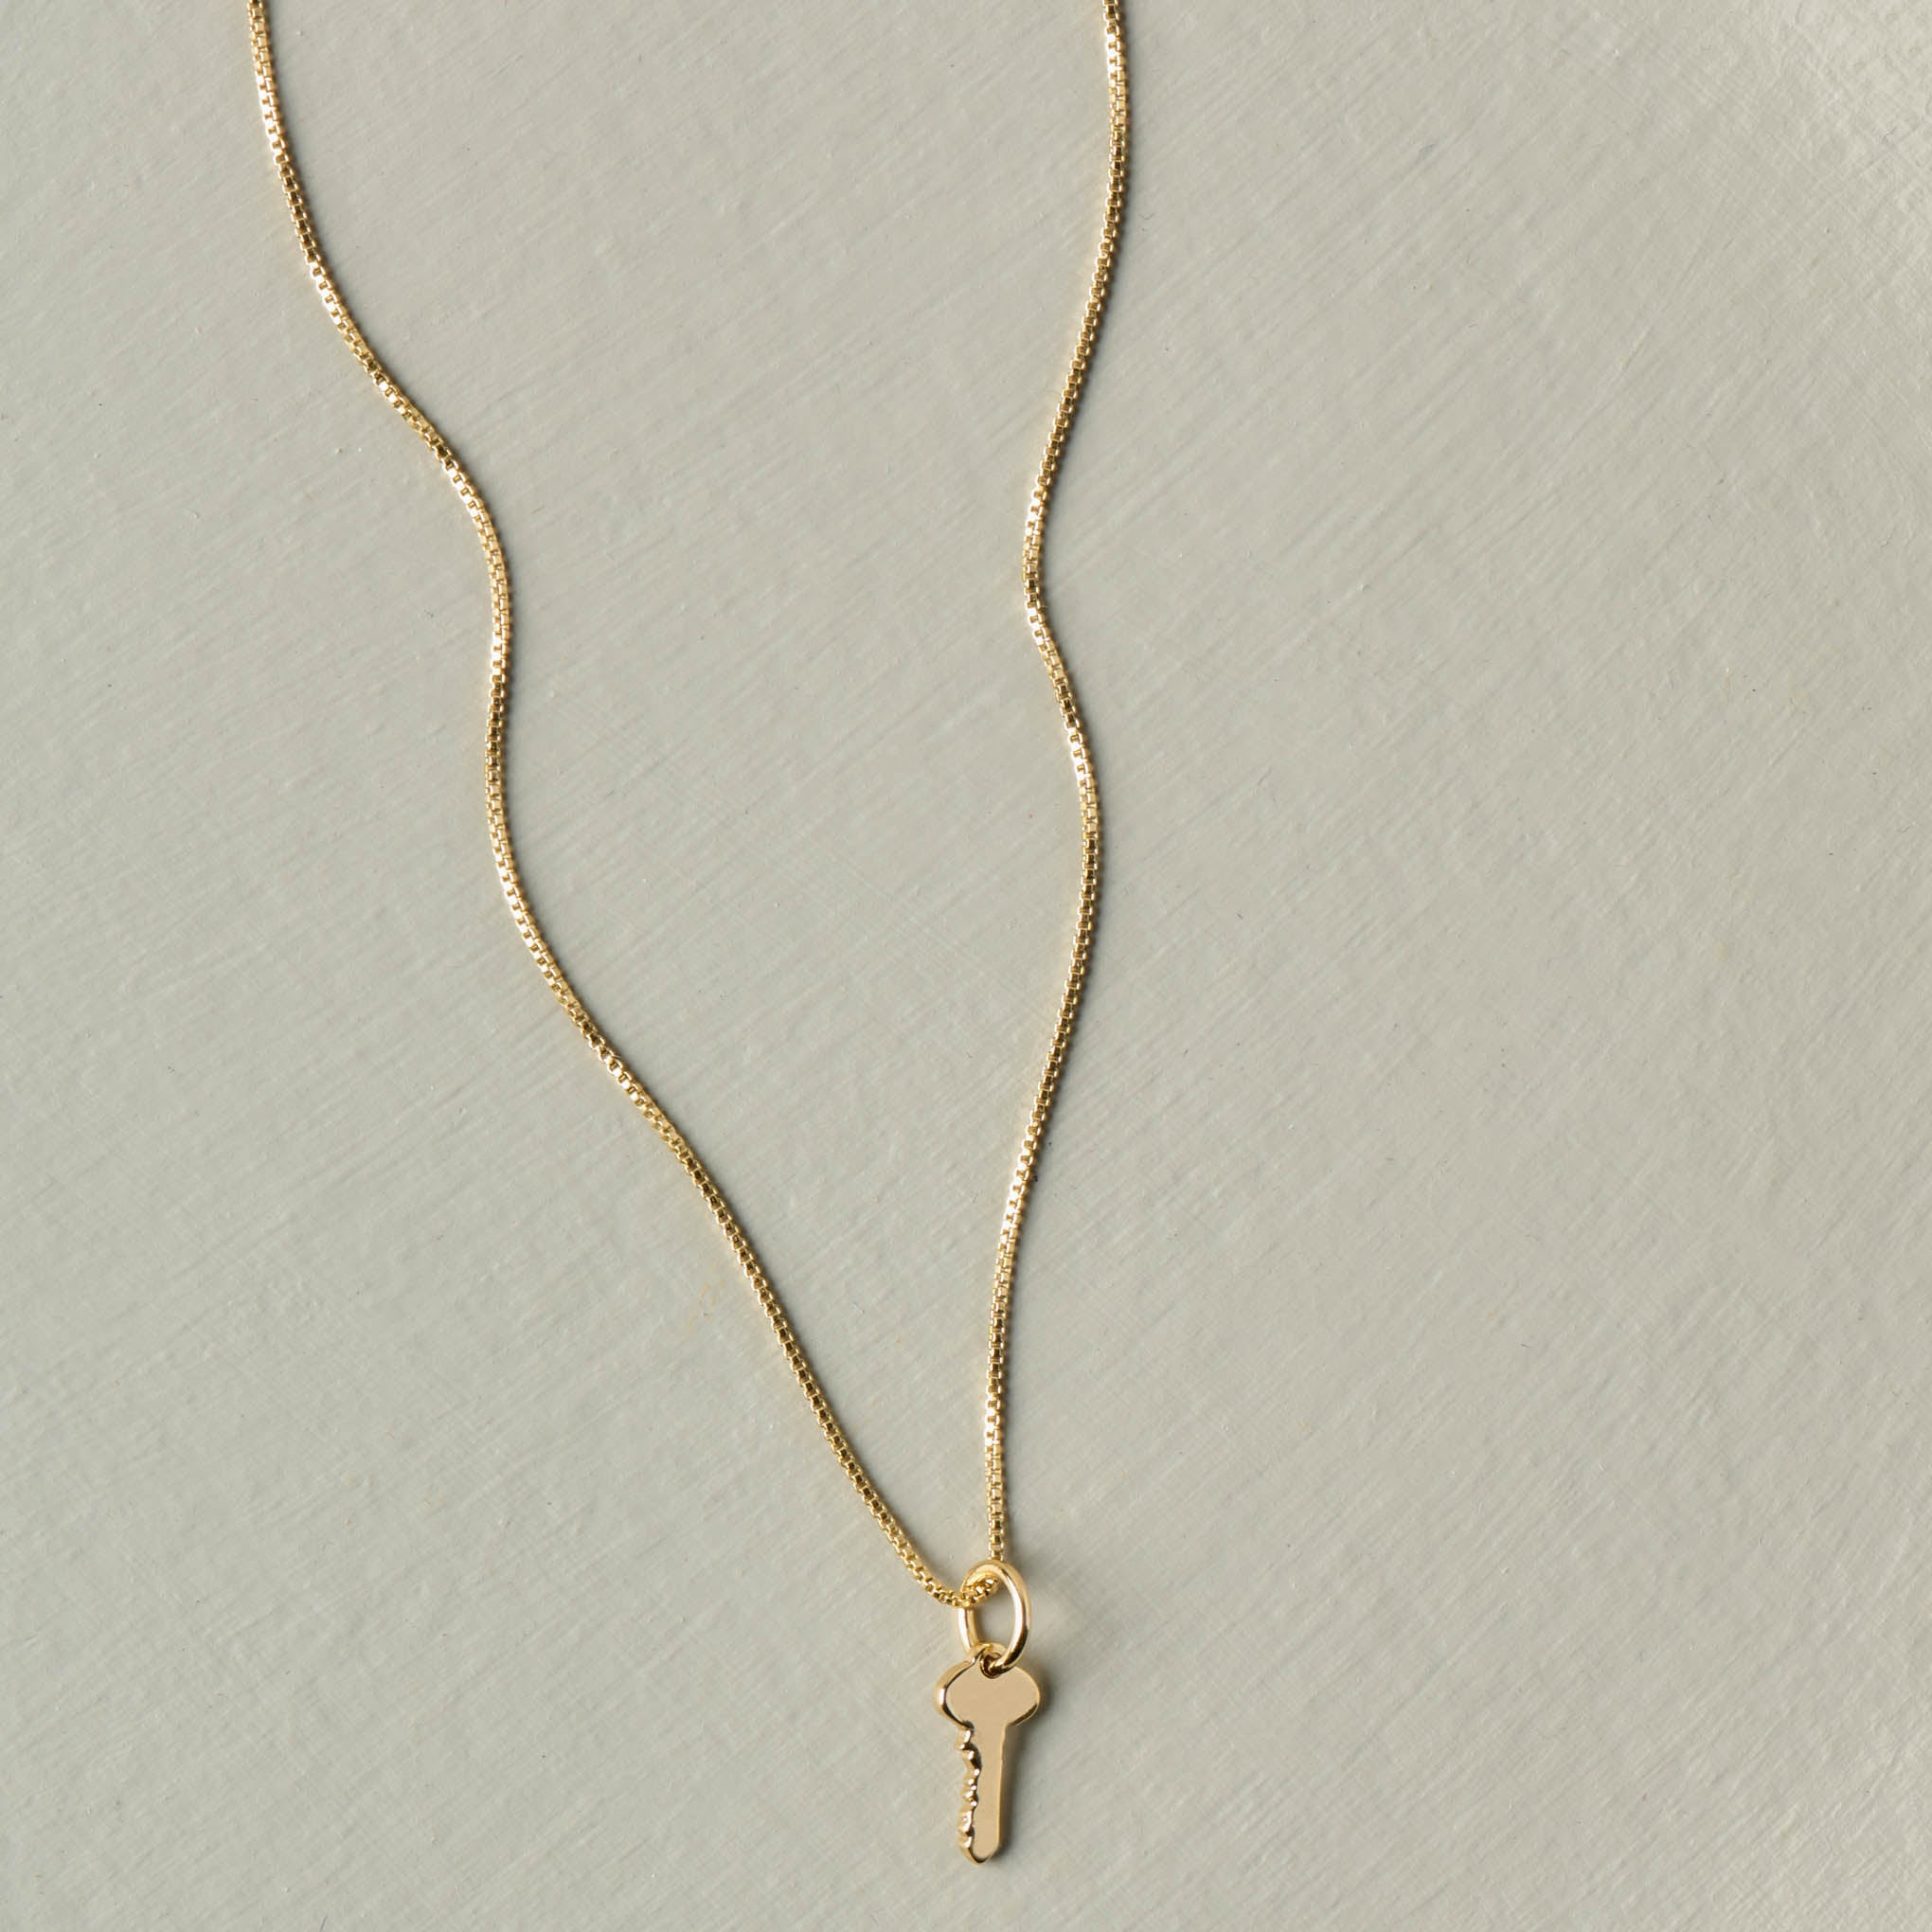 Golden Key Chain Necklace $52.00